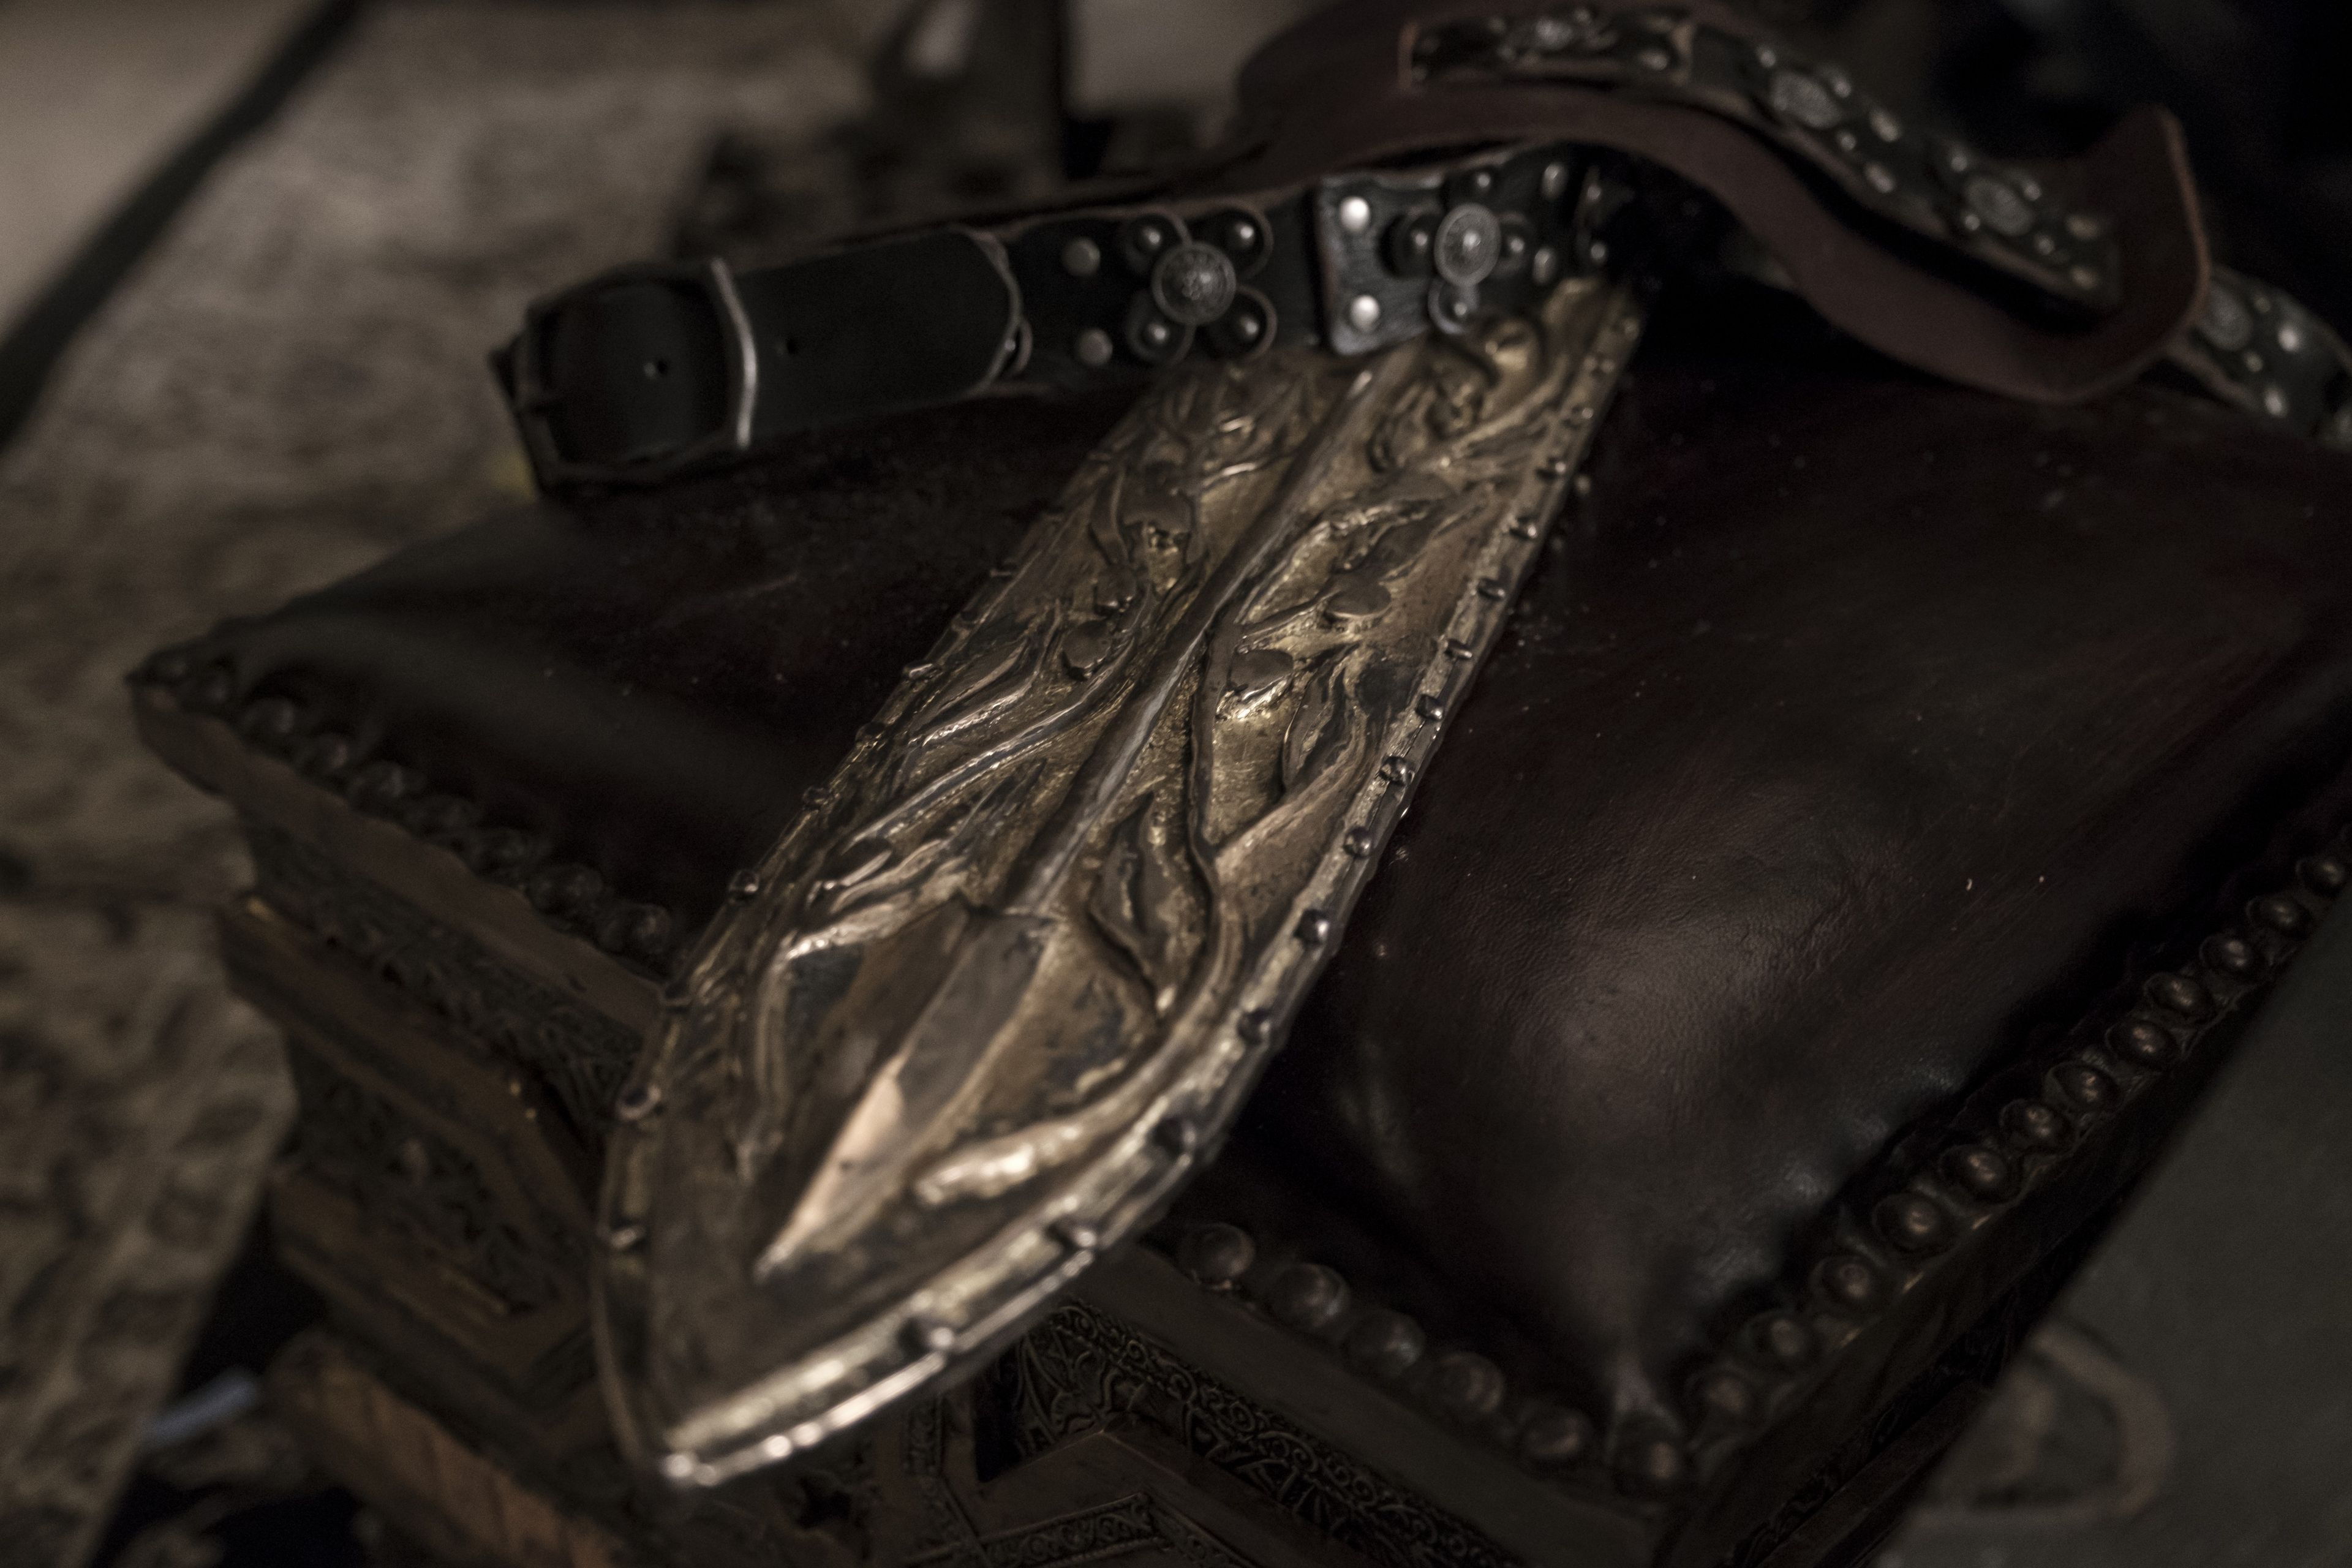 The sword of Laban rests on a box.